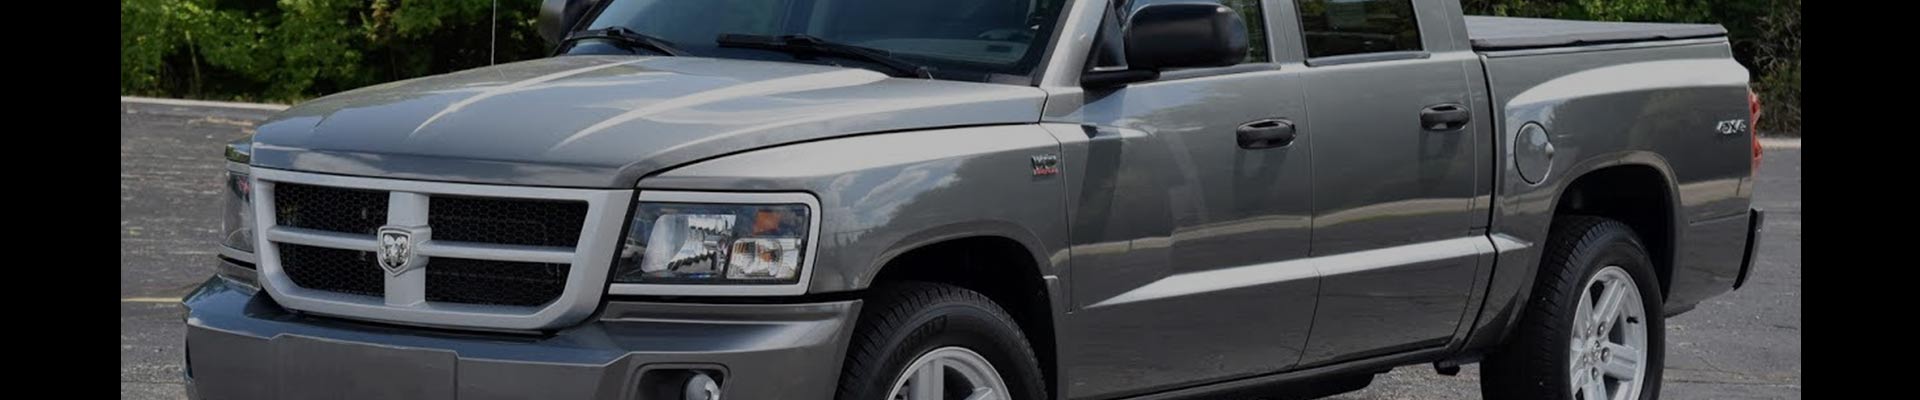 Shop Replacement and OEM Ram Dakota Parts with Discounted Price on the Net